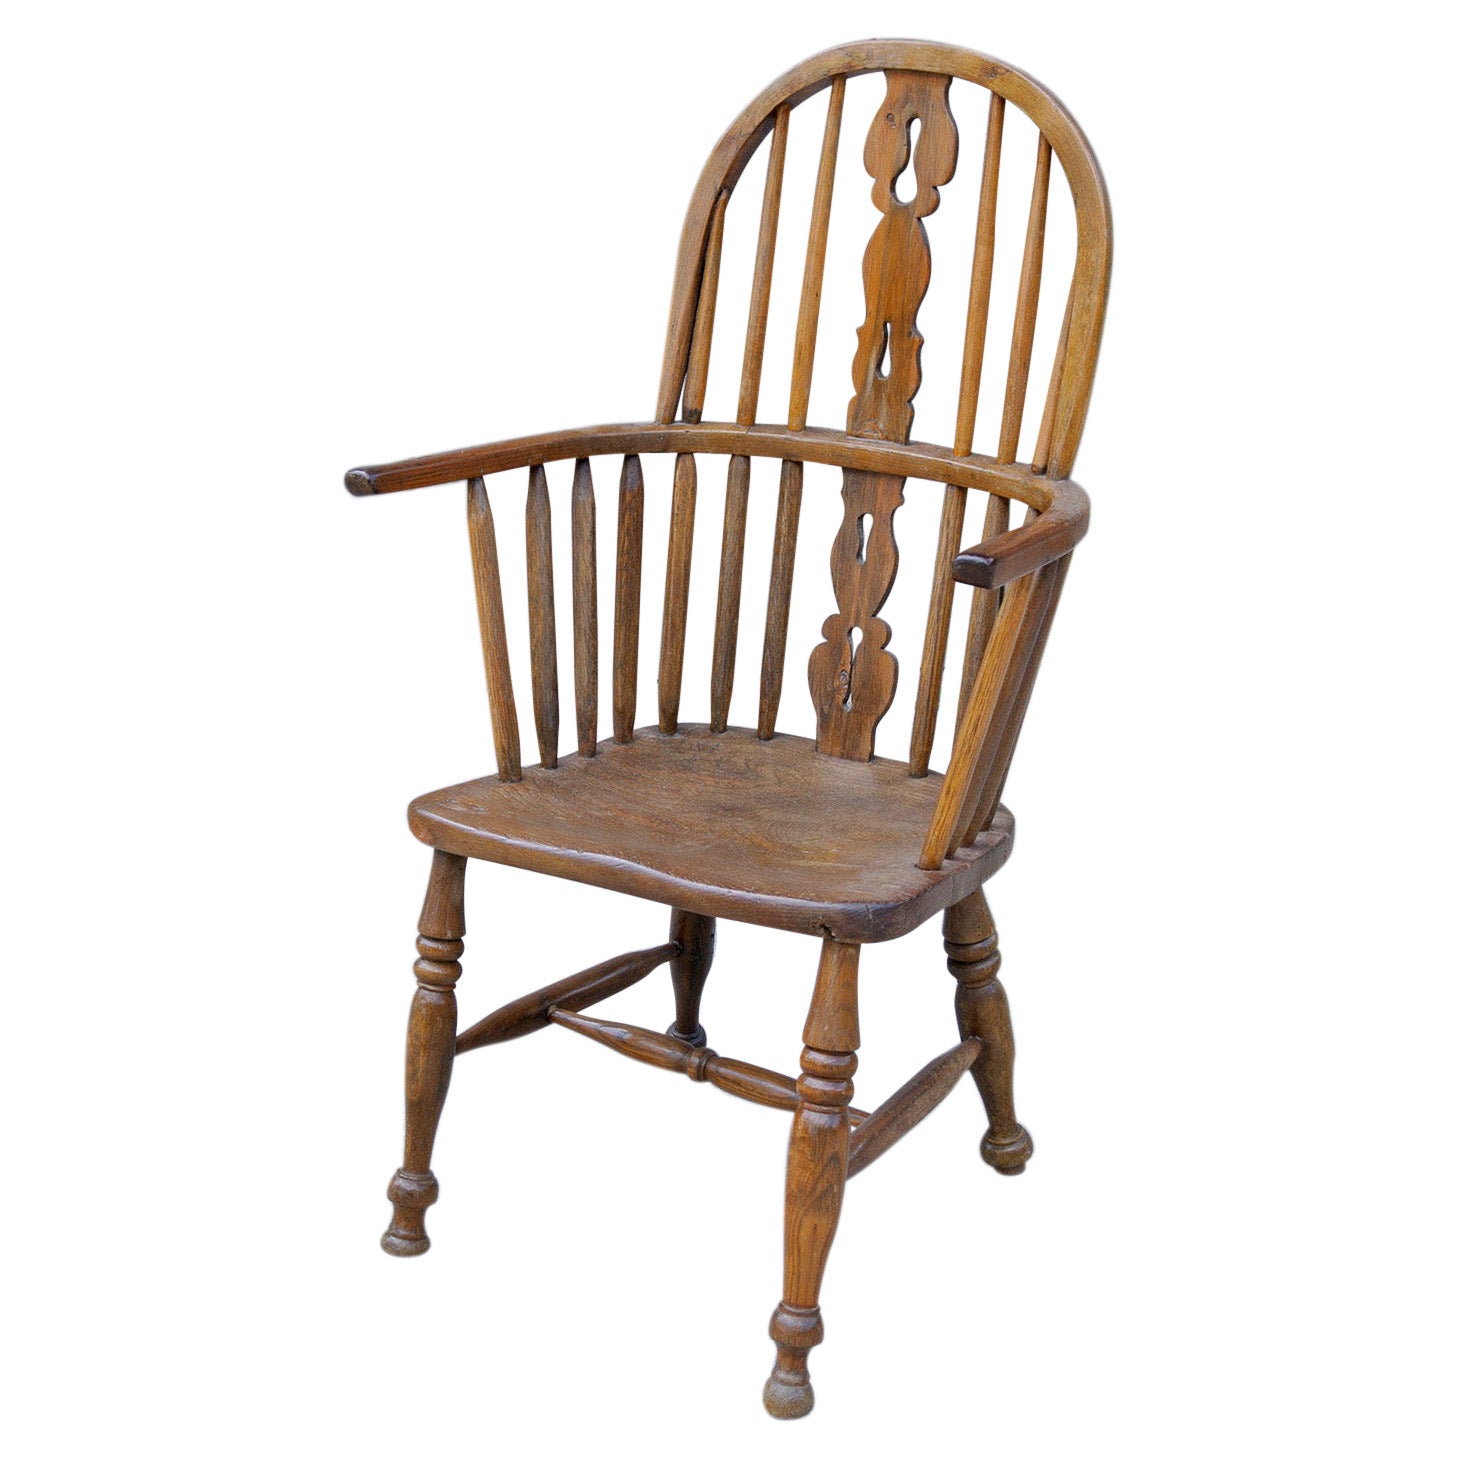 Primitive 19th Century Yew and Ash Windsor Chair For Sale